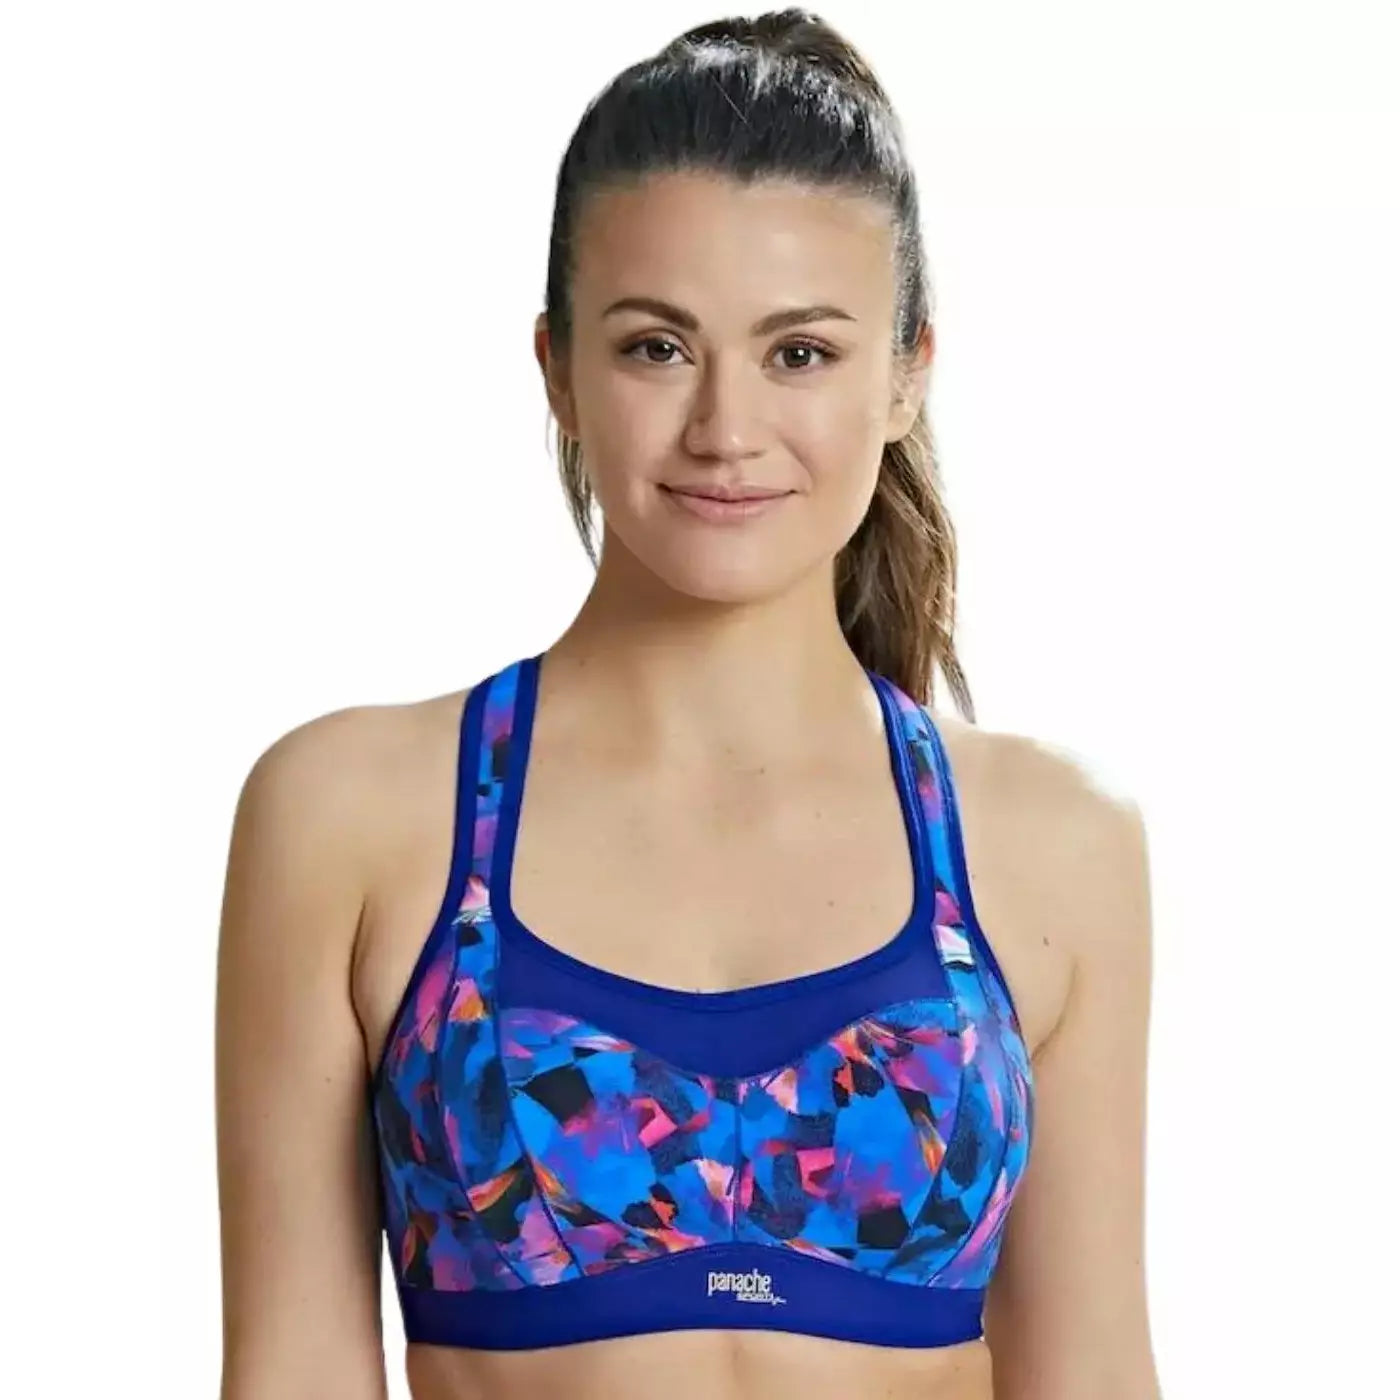 Panache Abstract Animal Print Non Wired Sports Bra, Blue/Multi at